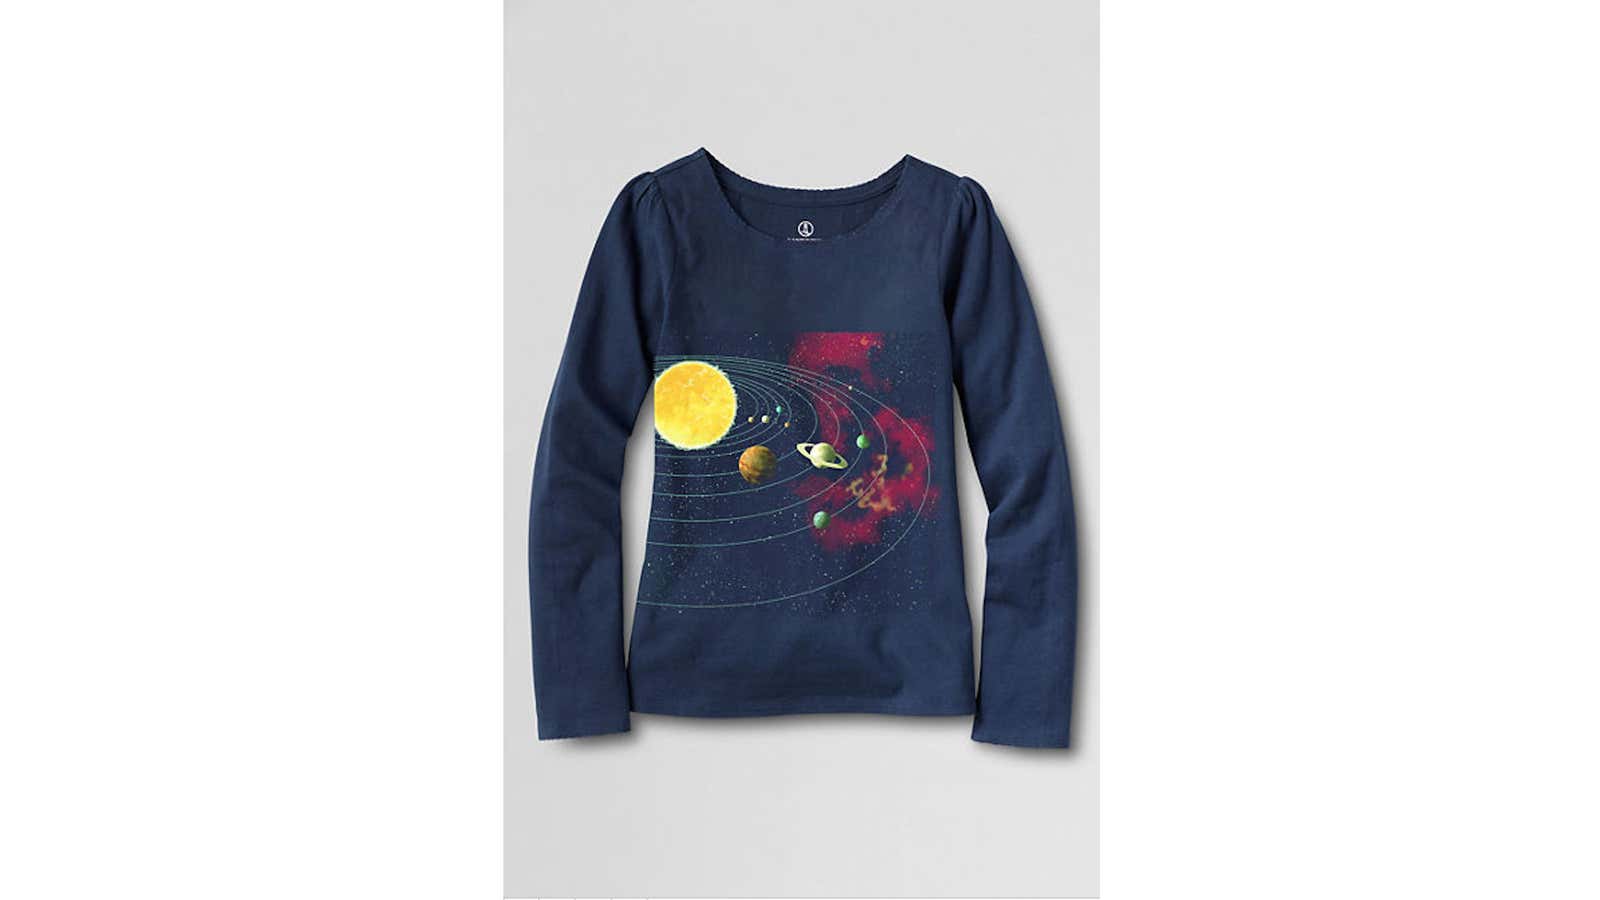 A science-themed Lands’ End t-shirt for girls.